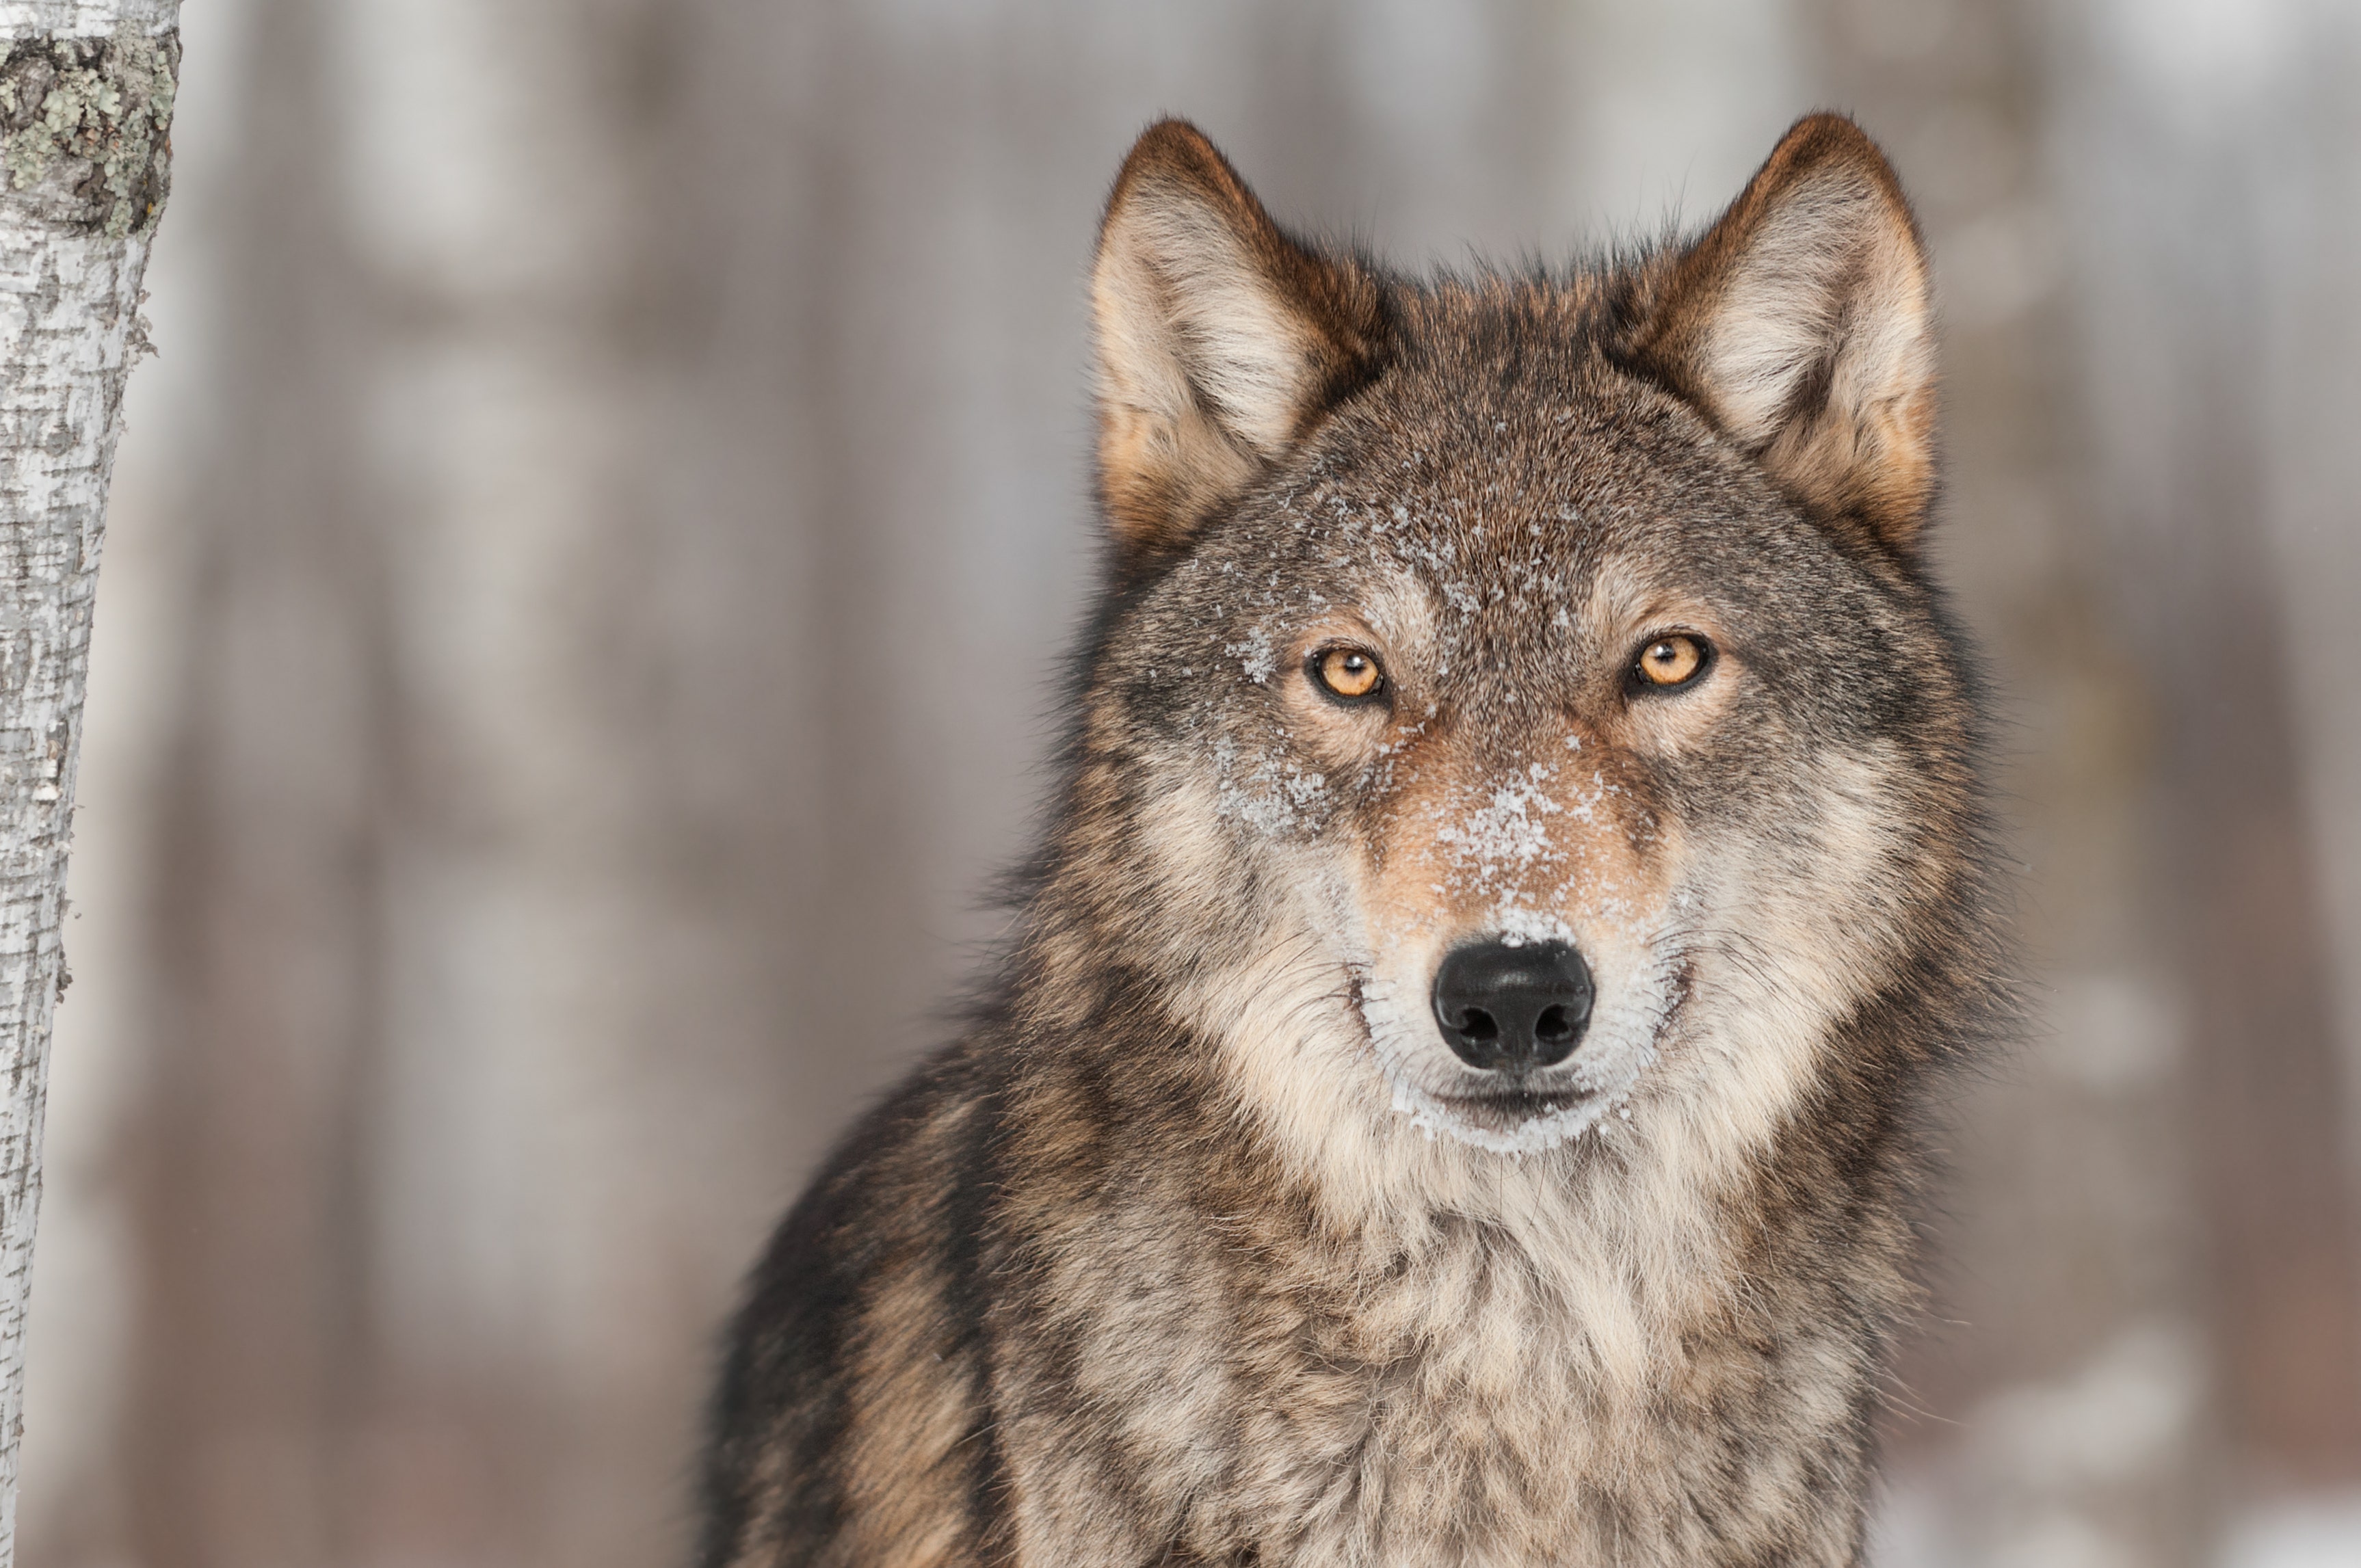 Montana halts wolf trapping and hunting in certain areas of the state